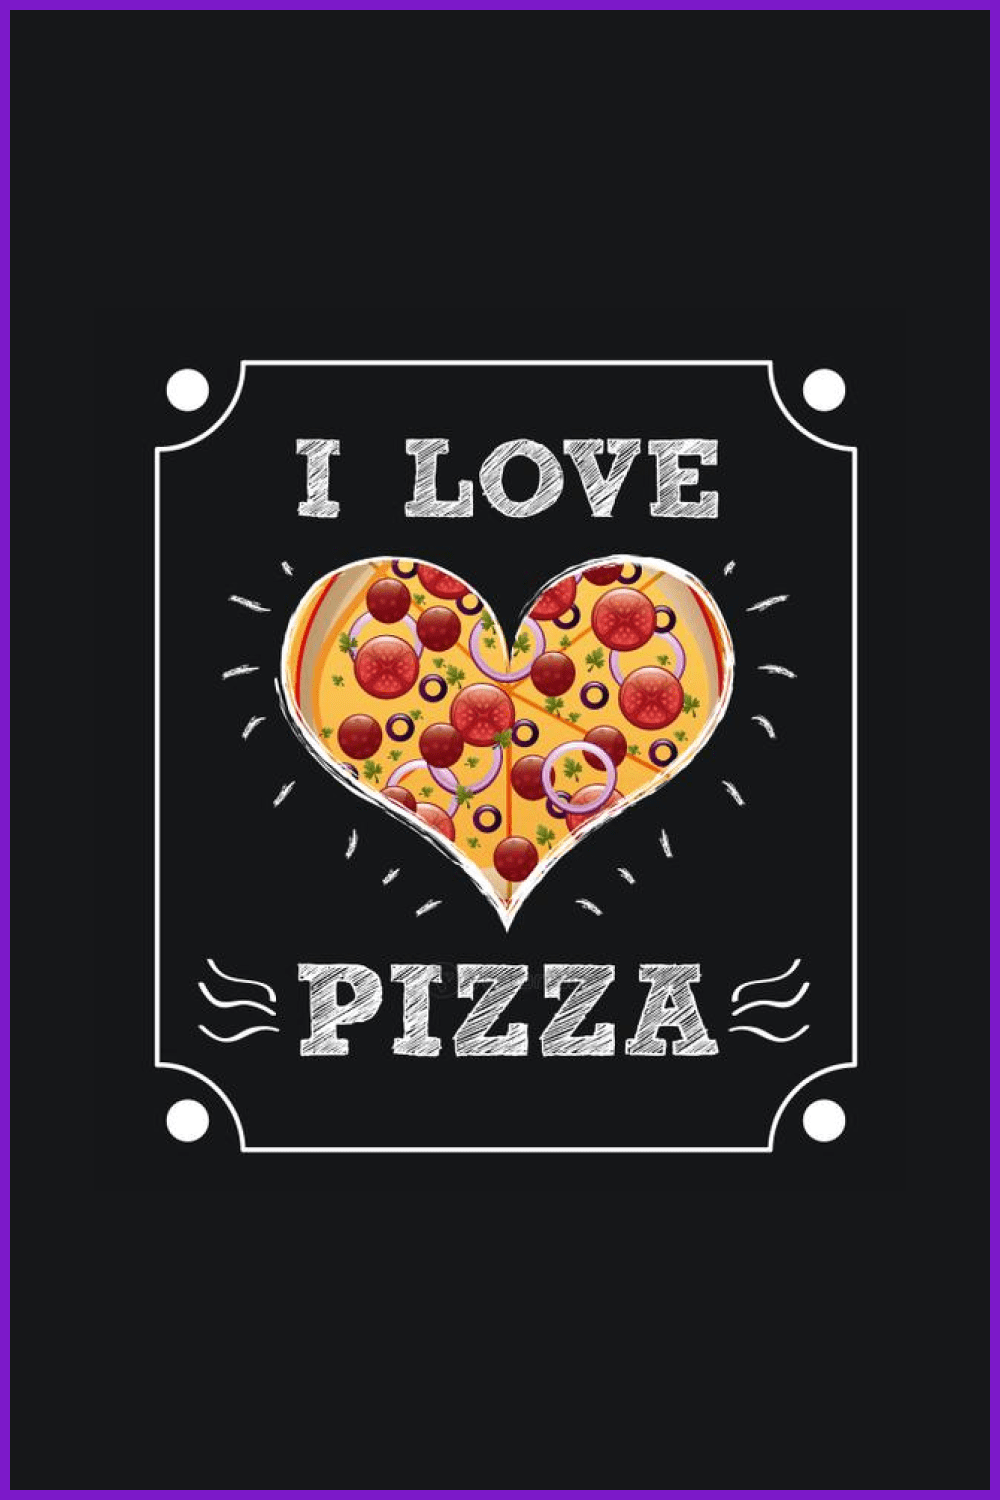 Pizza drawing in the form of a heart on a black background.